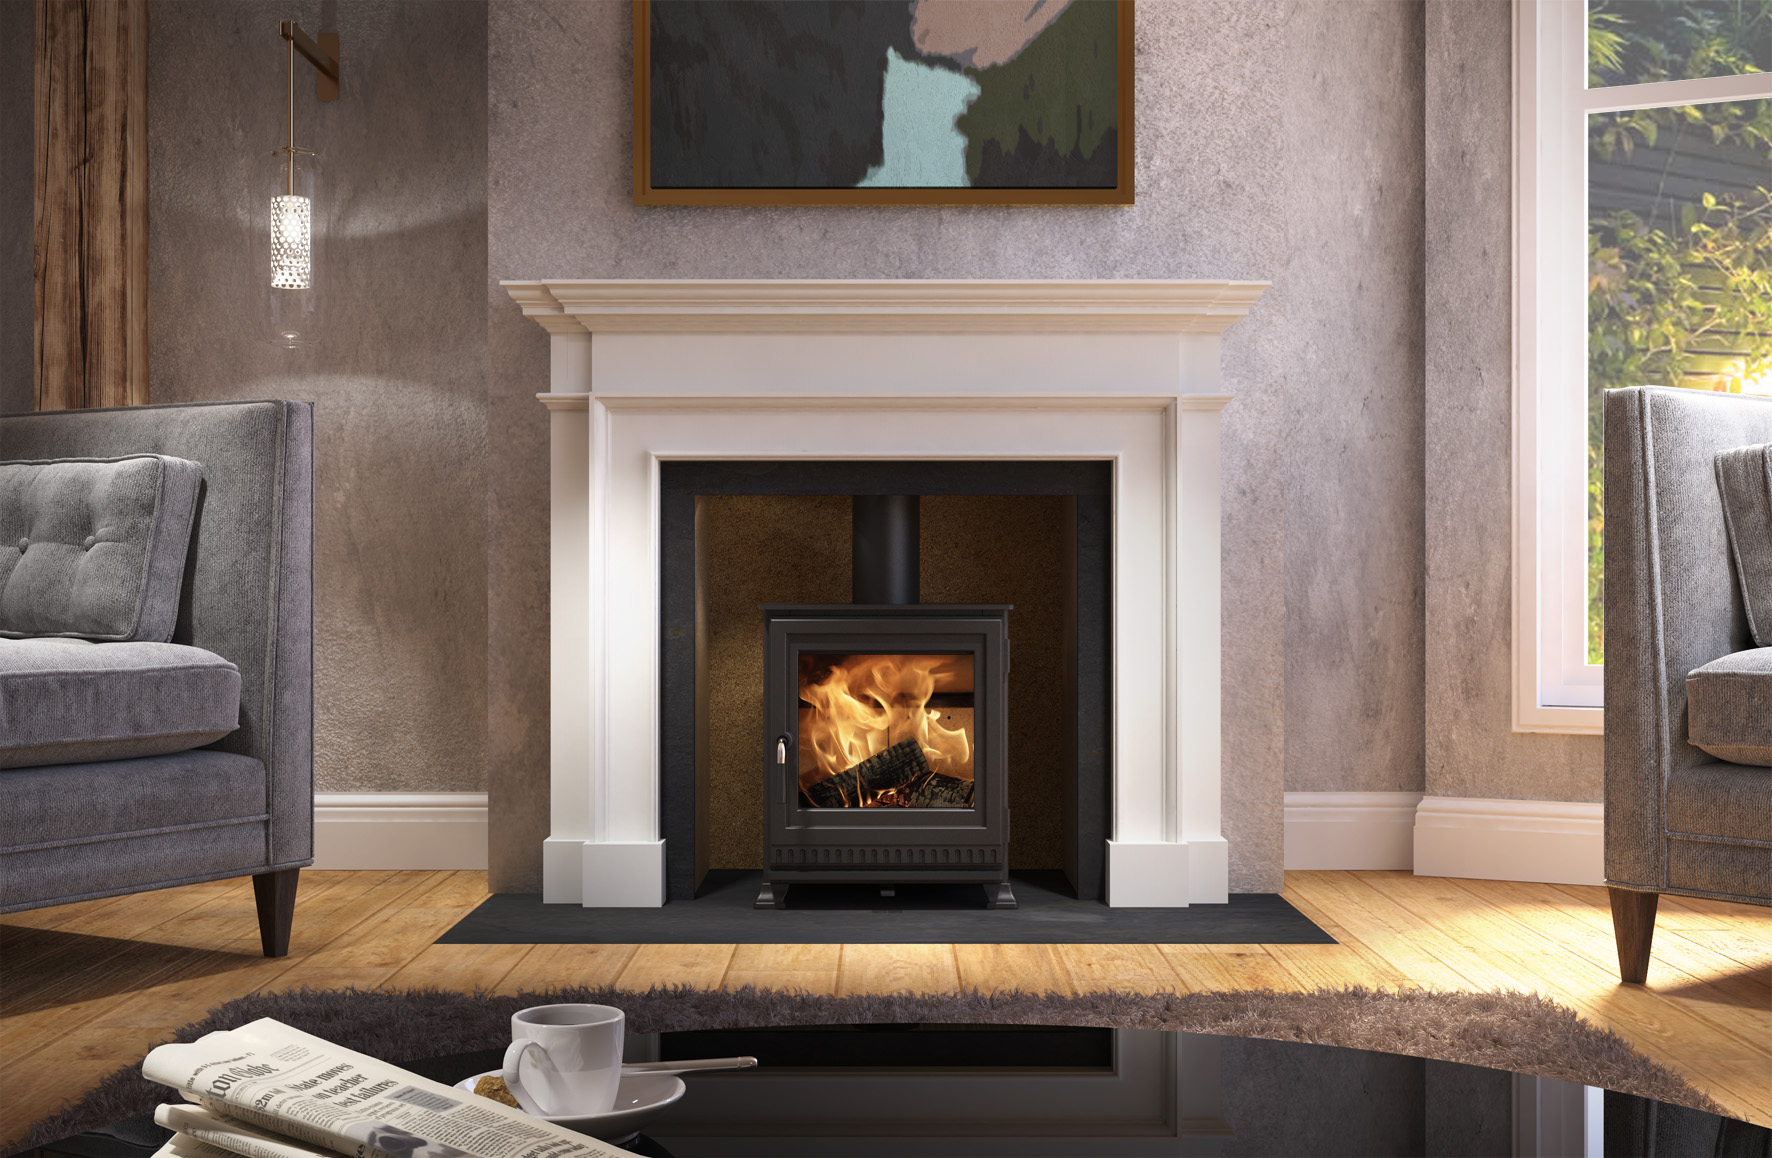 DRU introduces new room-sealed versions of its Dik Geurts branded wood stoves